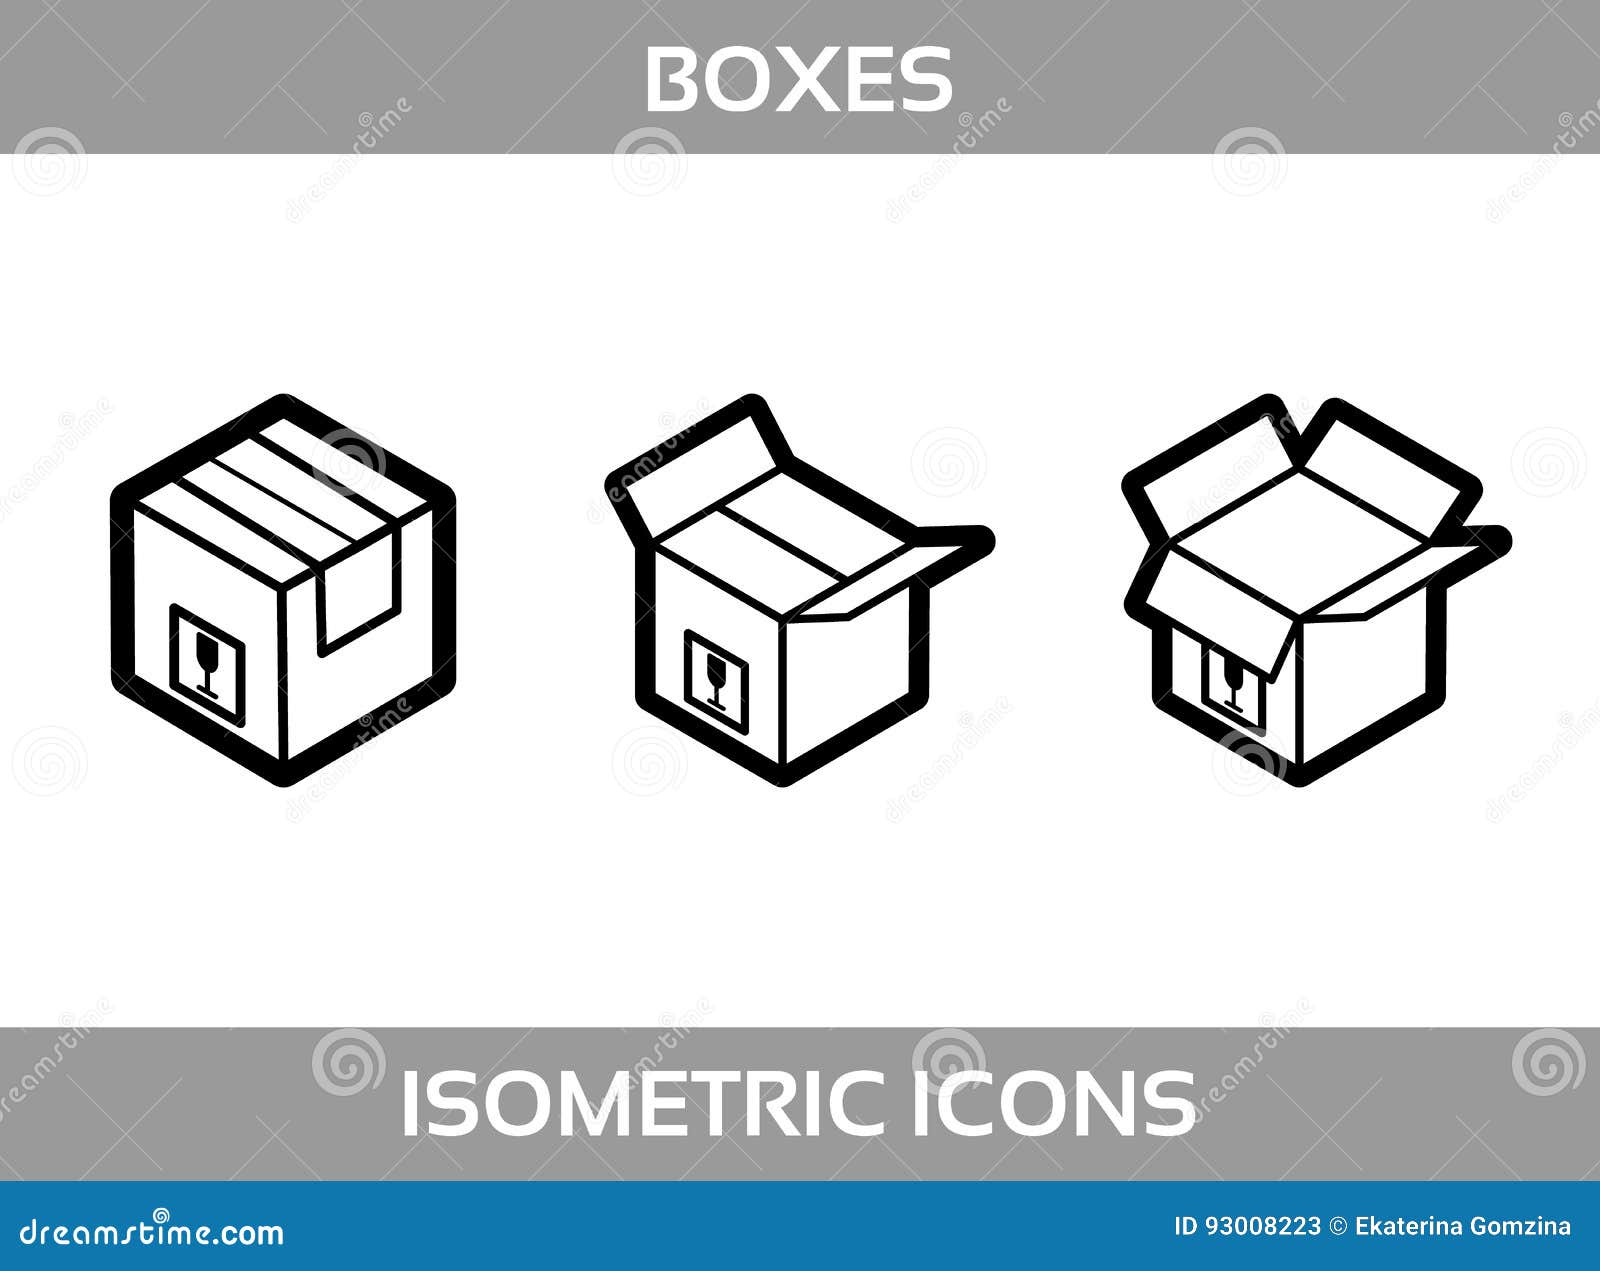 https://thumbs.dreamstime.com/z/simple-set-isometric-packaging-boxes-vector-line-art-icons-black-white-line-art-isometric-icons-thick-strokes-93008223.jpg